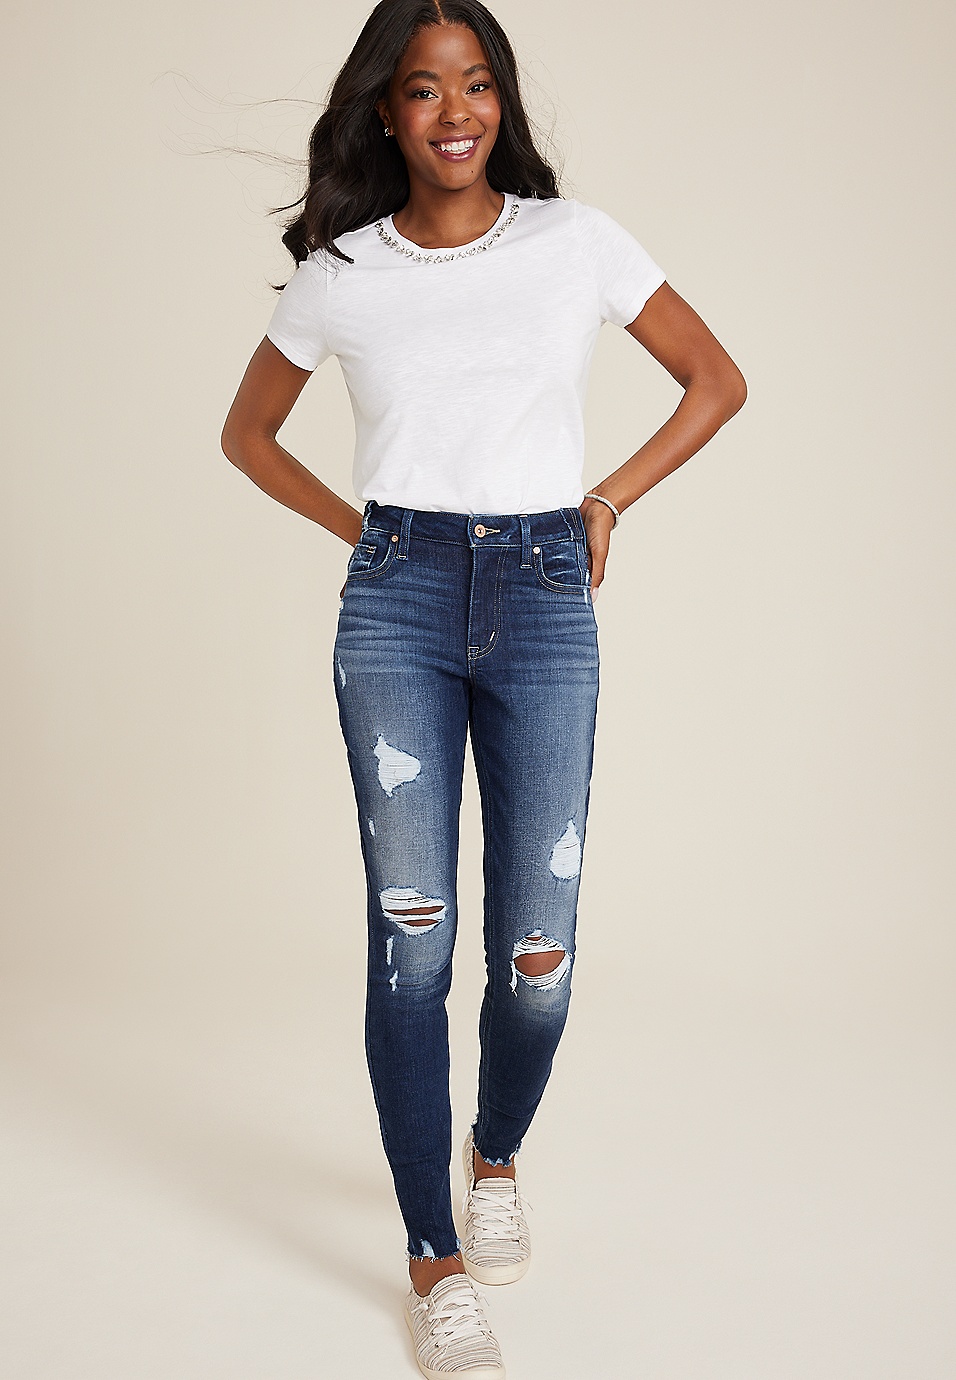 Stylish High Waisted Skinny Denim Pants With Ripped Detail For